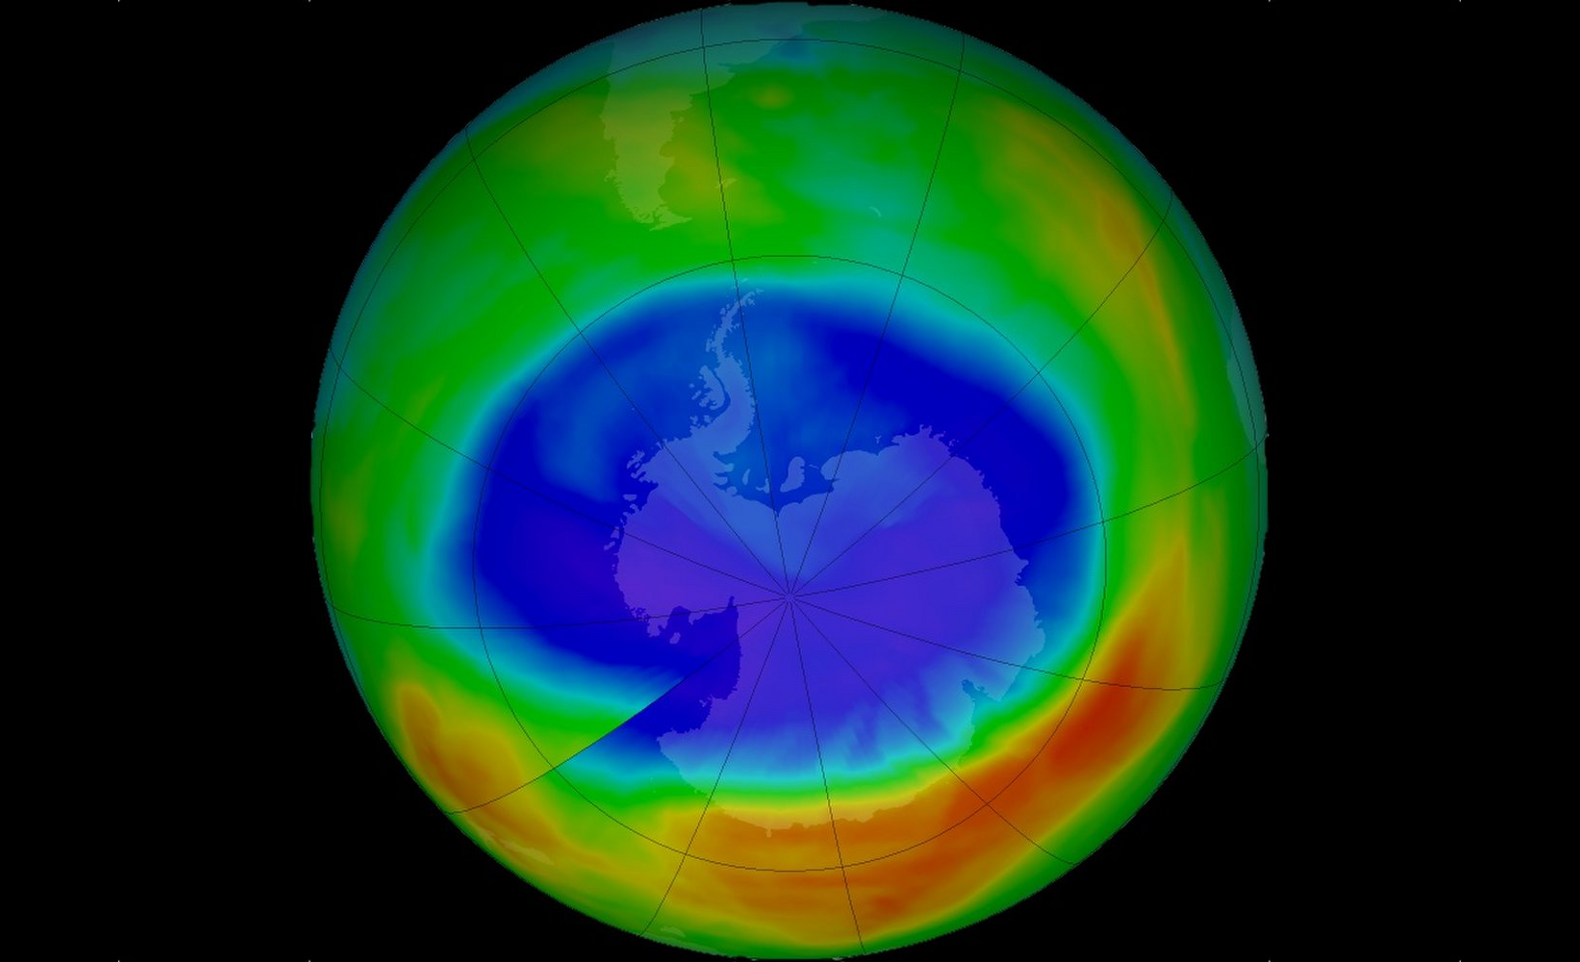 ozone and water vapor